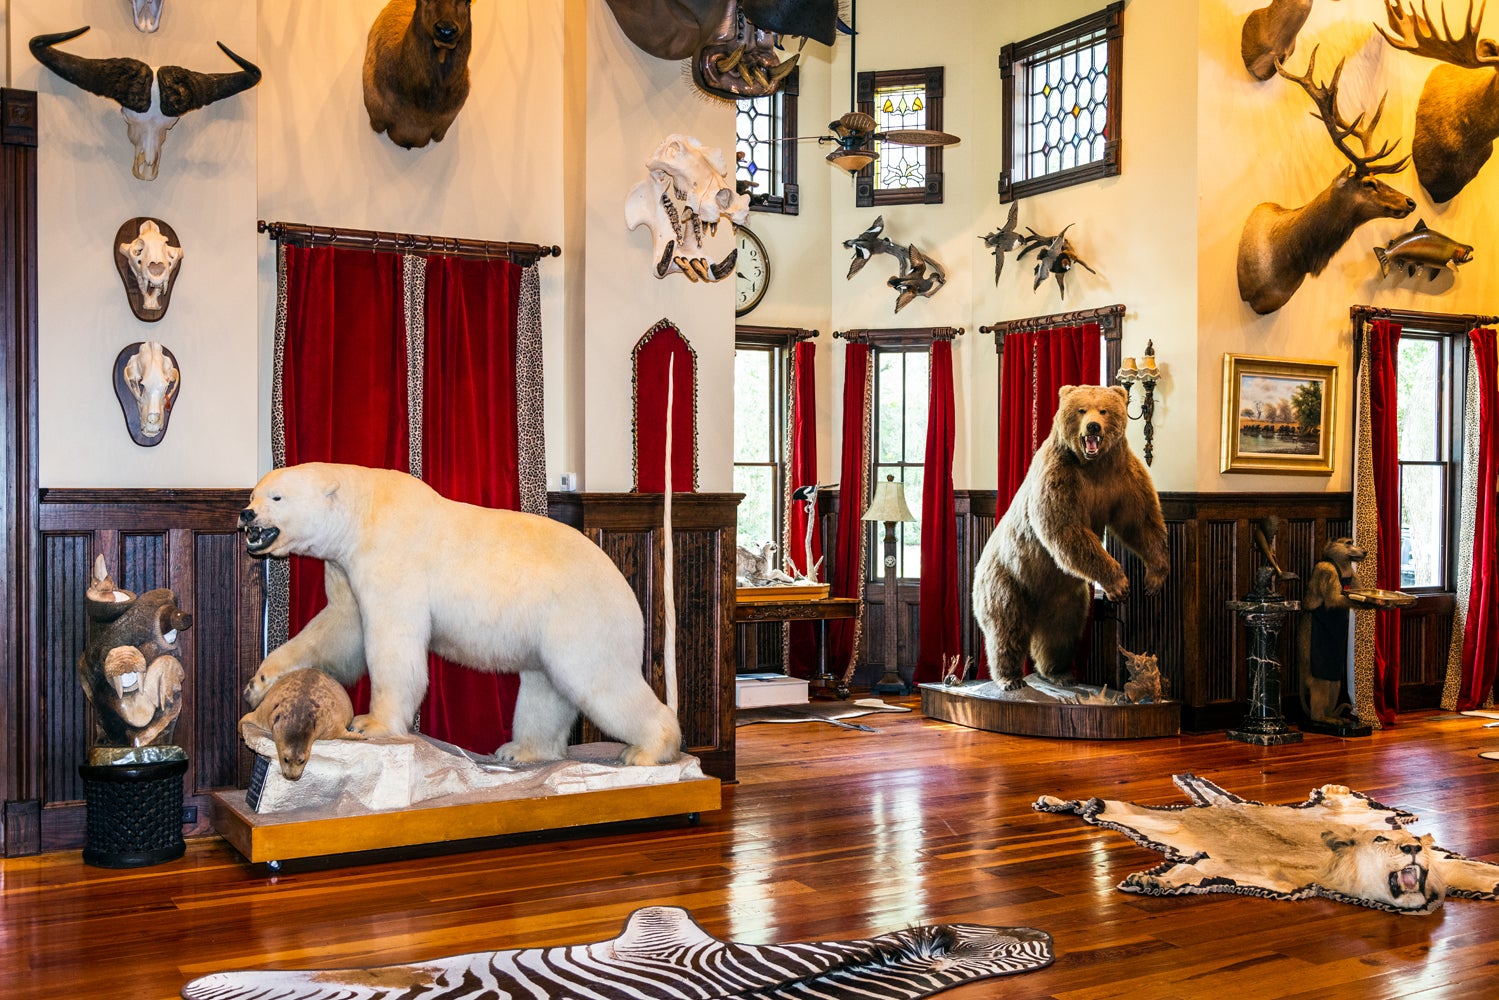 View of interior with taxidermied animals.